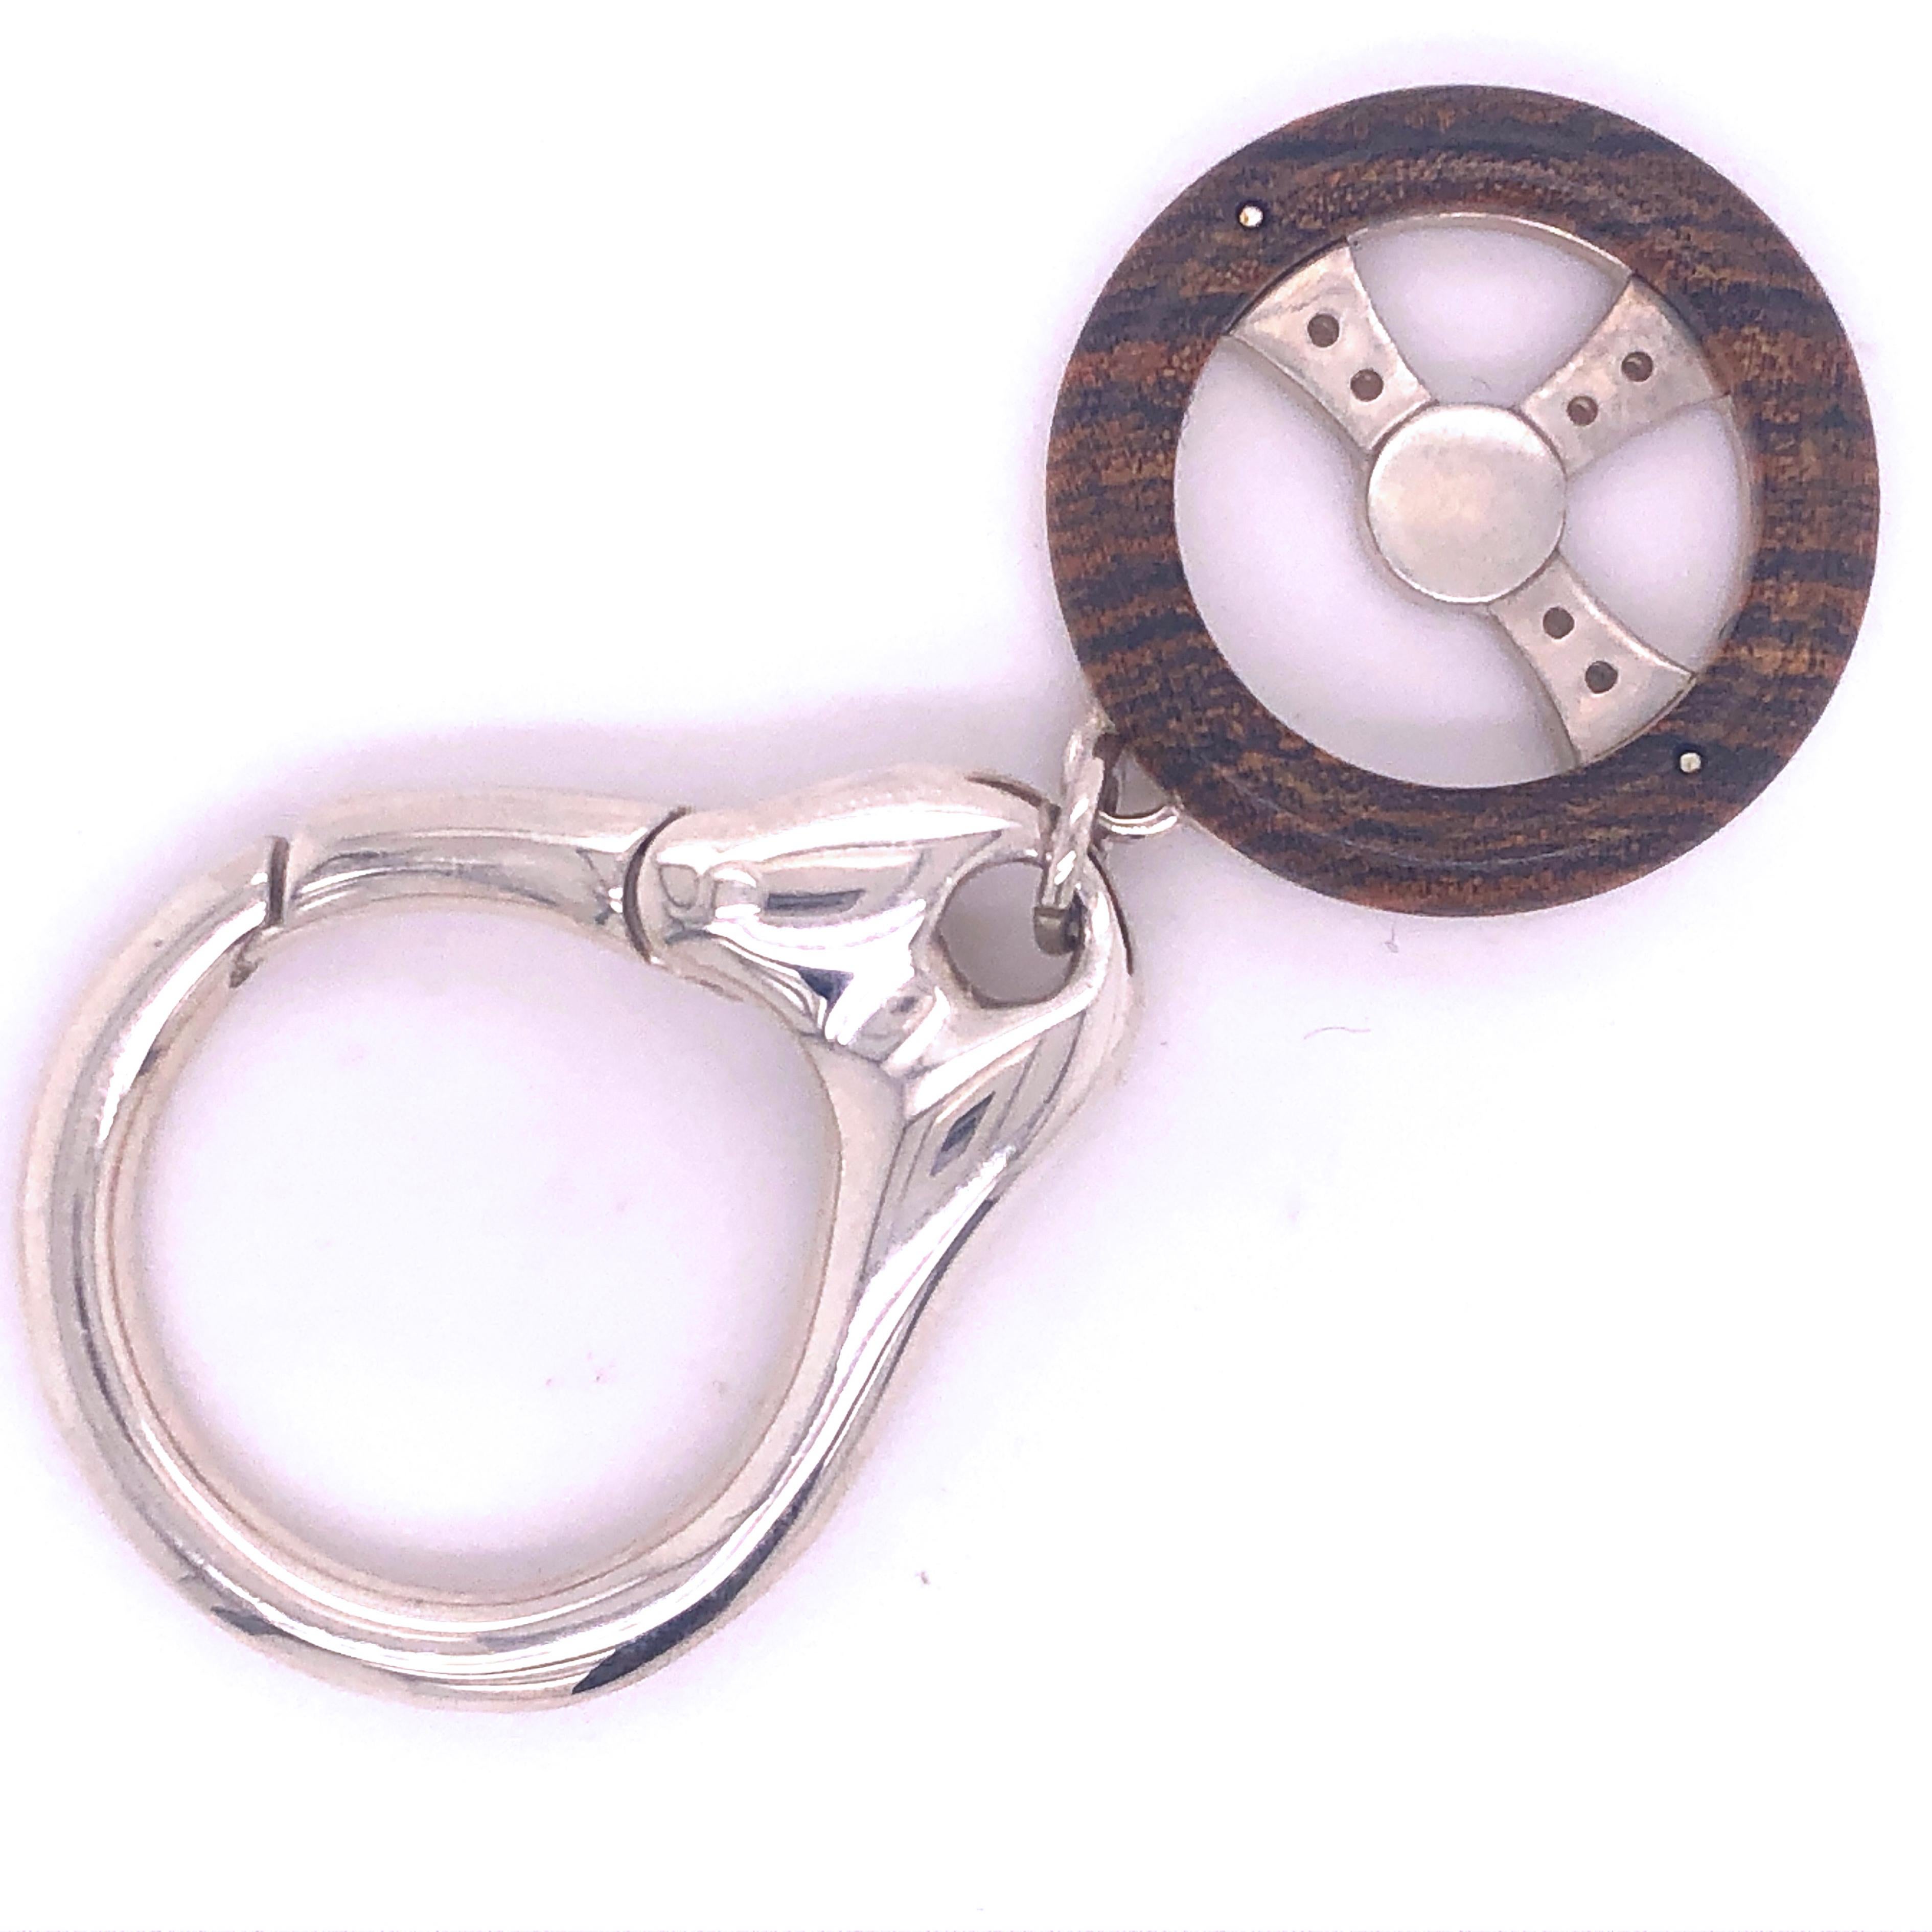 Unique, Chic Yet Timeless Solid Sterling Silver Hand Inlaid Snake Wood Steering Wheel Key Holder.
In our fitted black Box and pouch.
Initials or Key Holder's Name may be complimentary engraved on request on the Steering Wheel Back